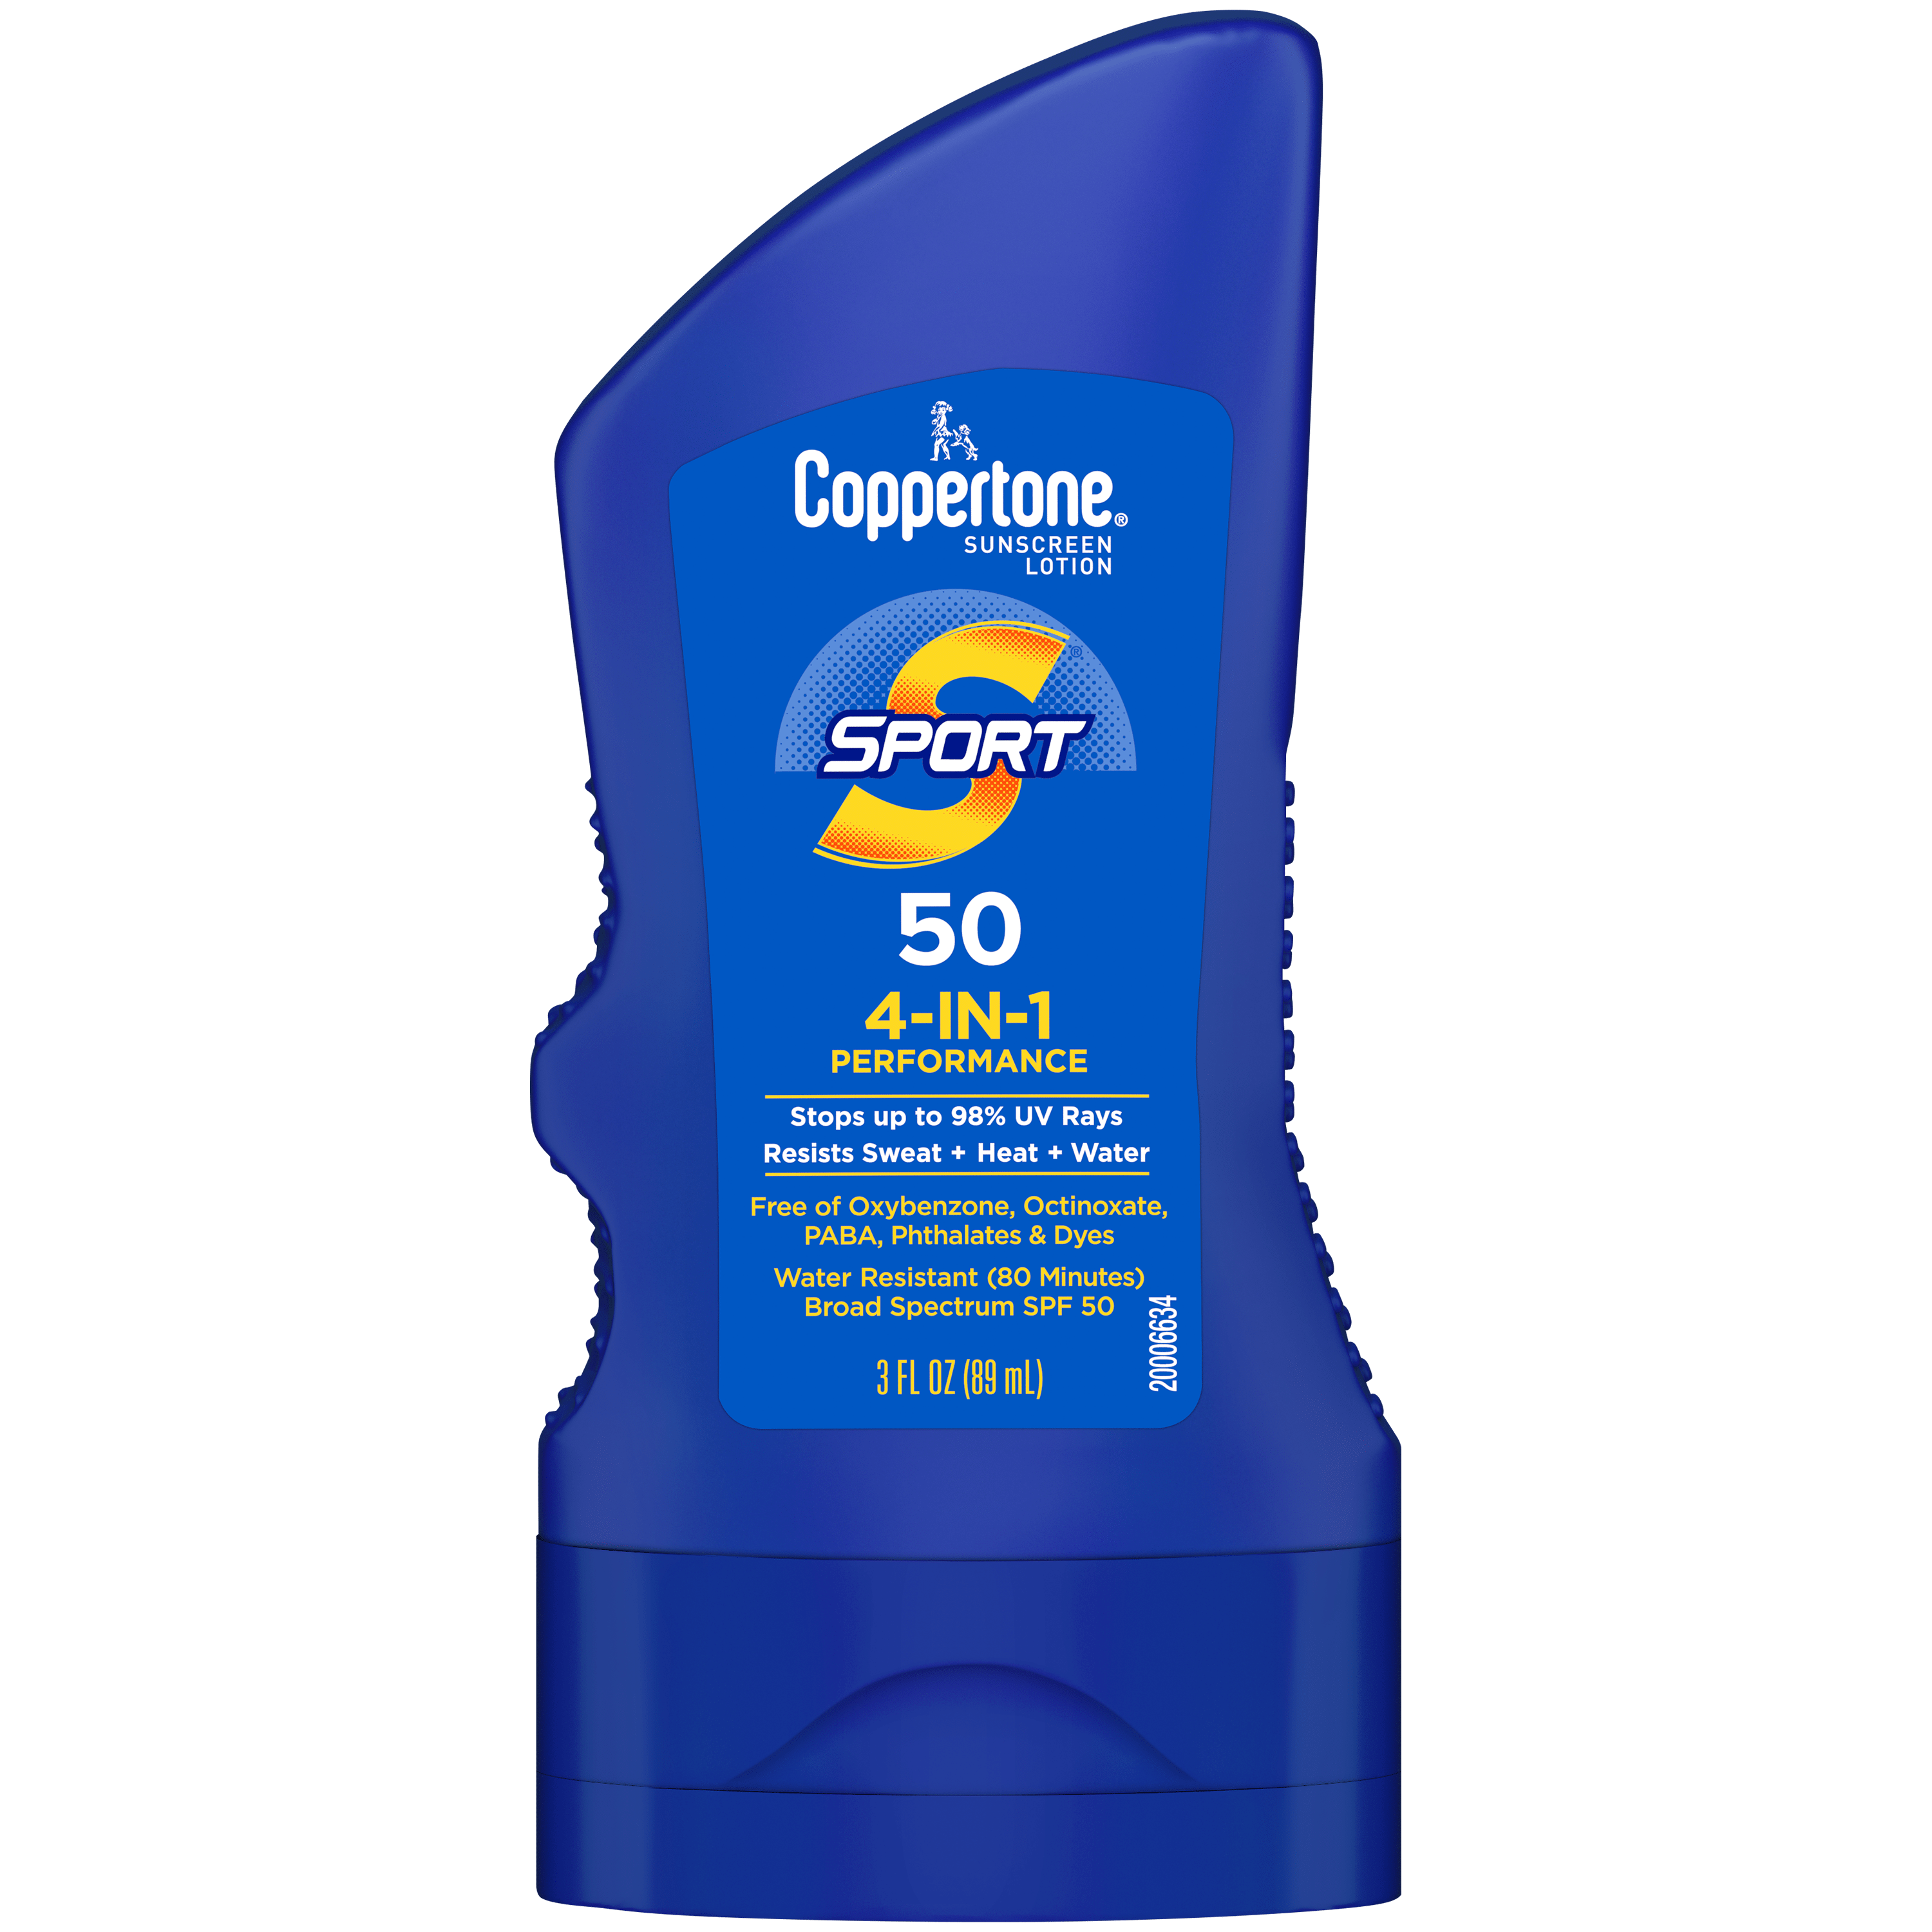 SPORT SPF 50 LOTION TRAVEL SIZE